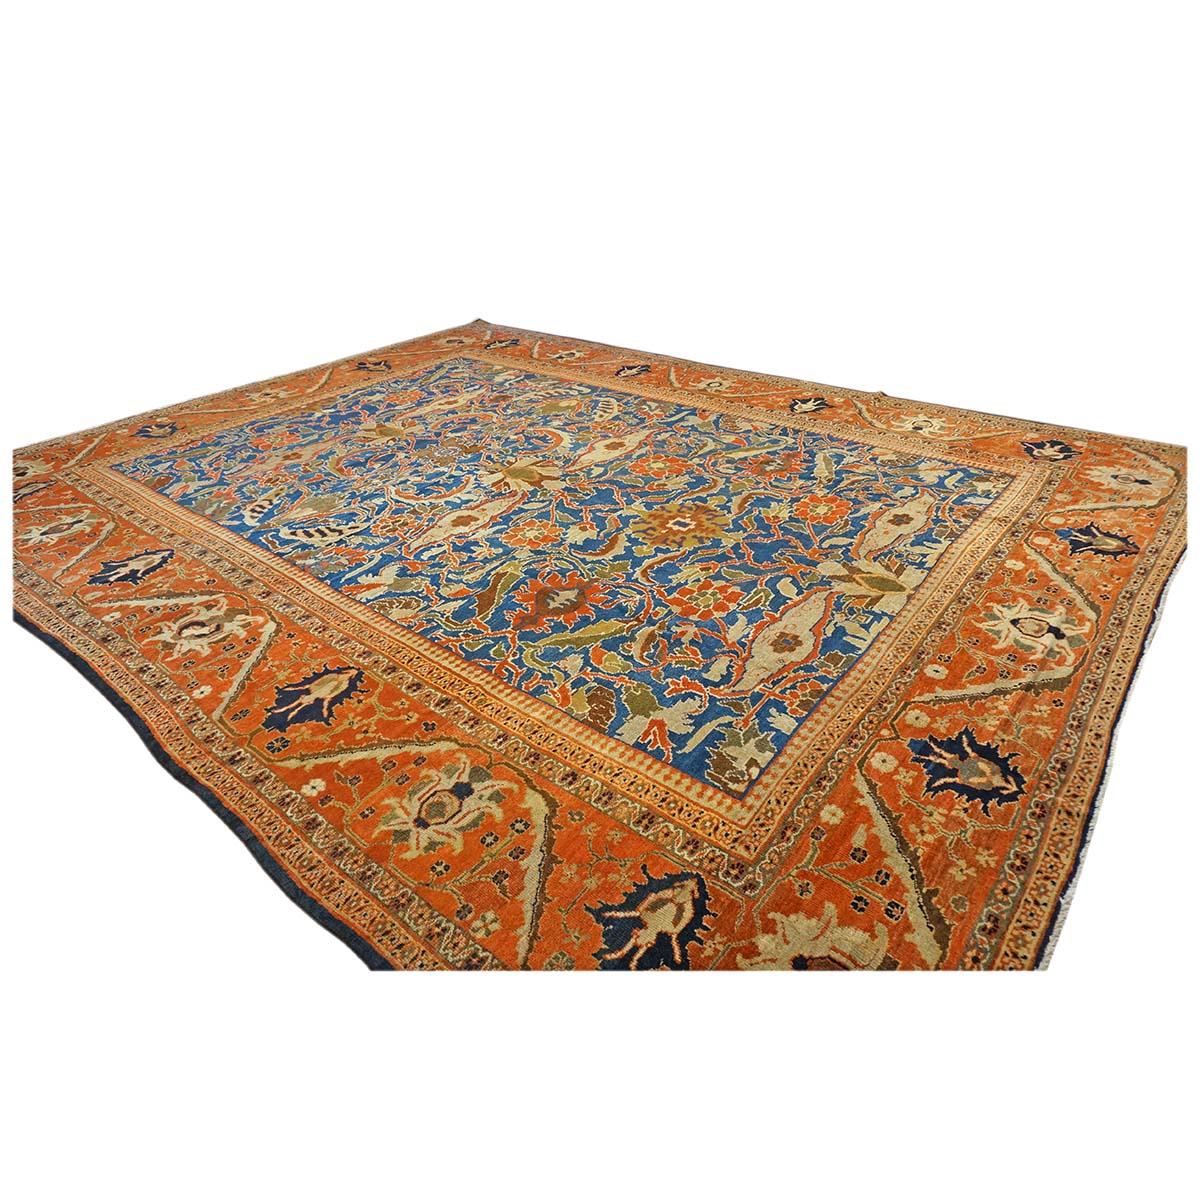 Mid-19th Century 1850s Antique Persian Ziegler Sultanabad 12x15 Orange, Blue, & Ivory Area Rug For Sale